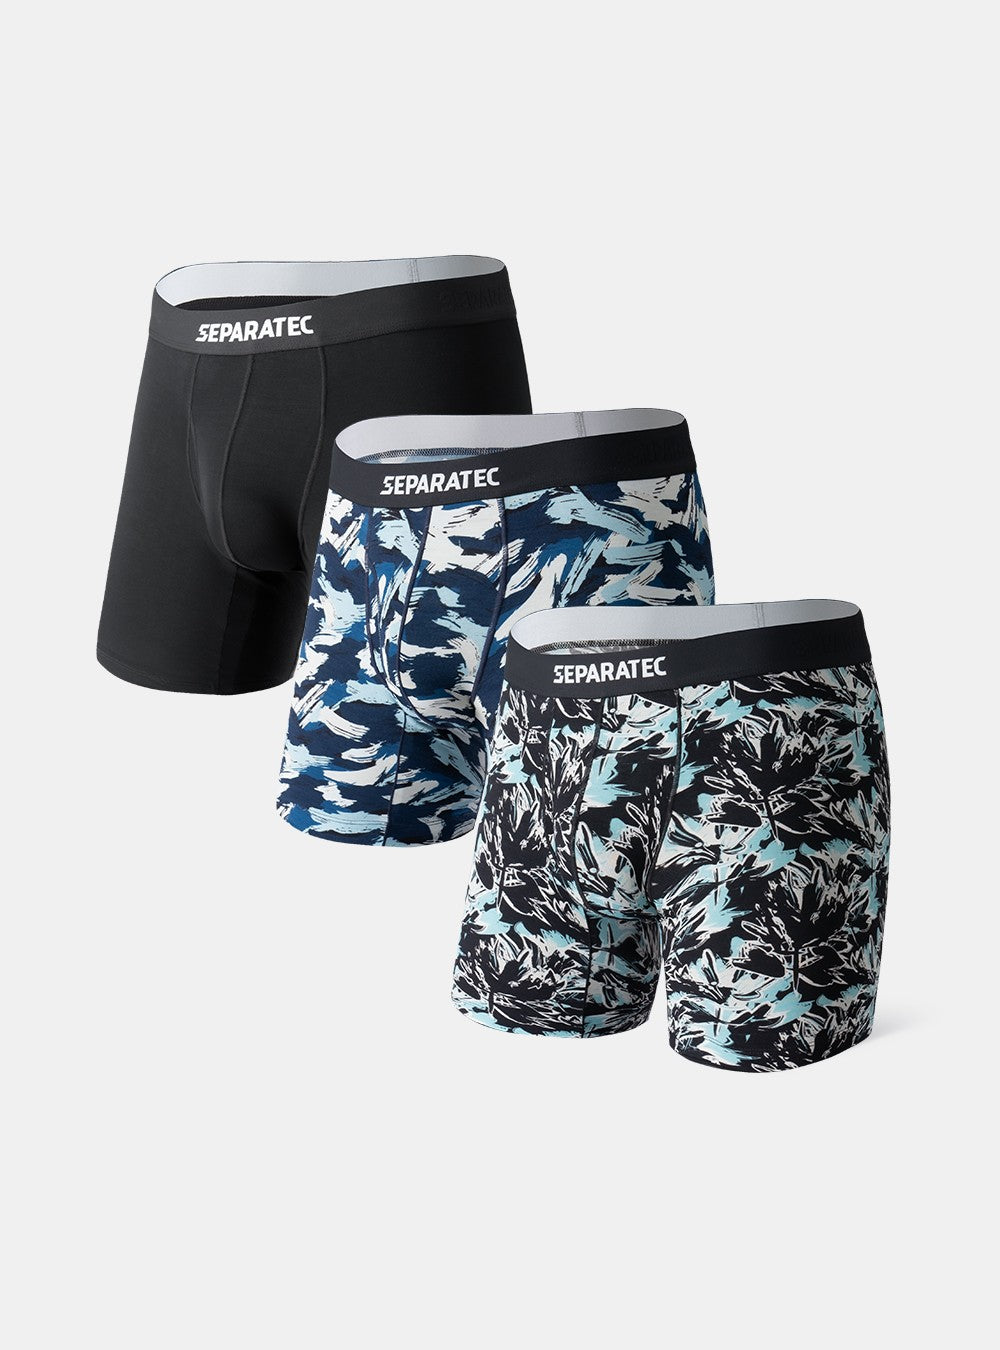 Blossom Prints 3D Single Ball Pouch Bamboo Rayon Boxer Briefs 3 Pack